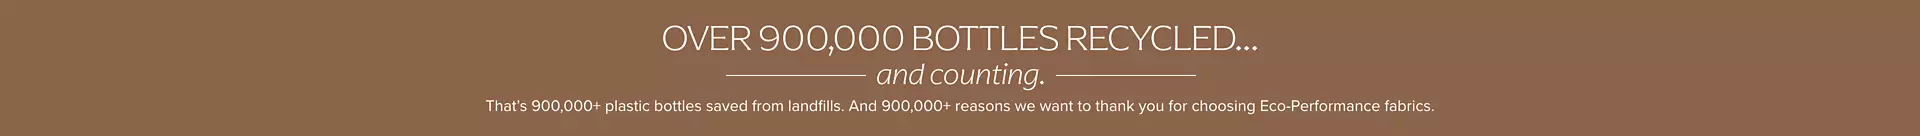 Over 500,000 bottles recycled... and counting. That's 500,000+ plastic bottles saved from landfills. And 900,000+ reason we want to thank you for choosing eco-performance fabrics.